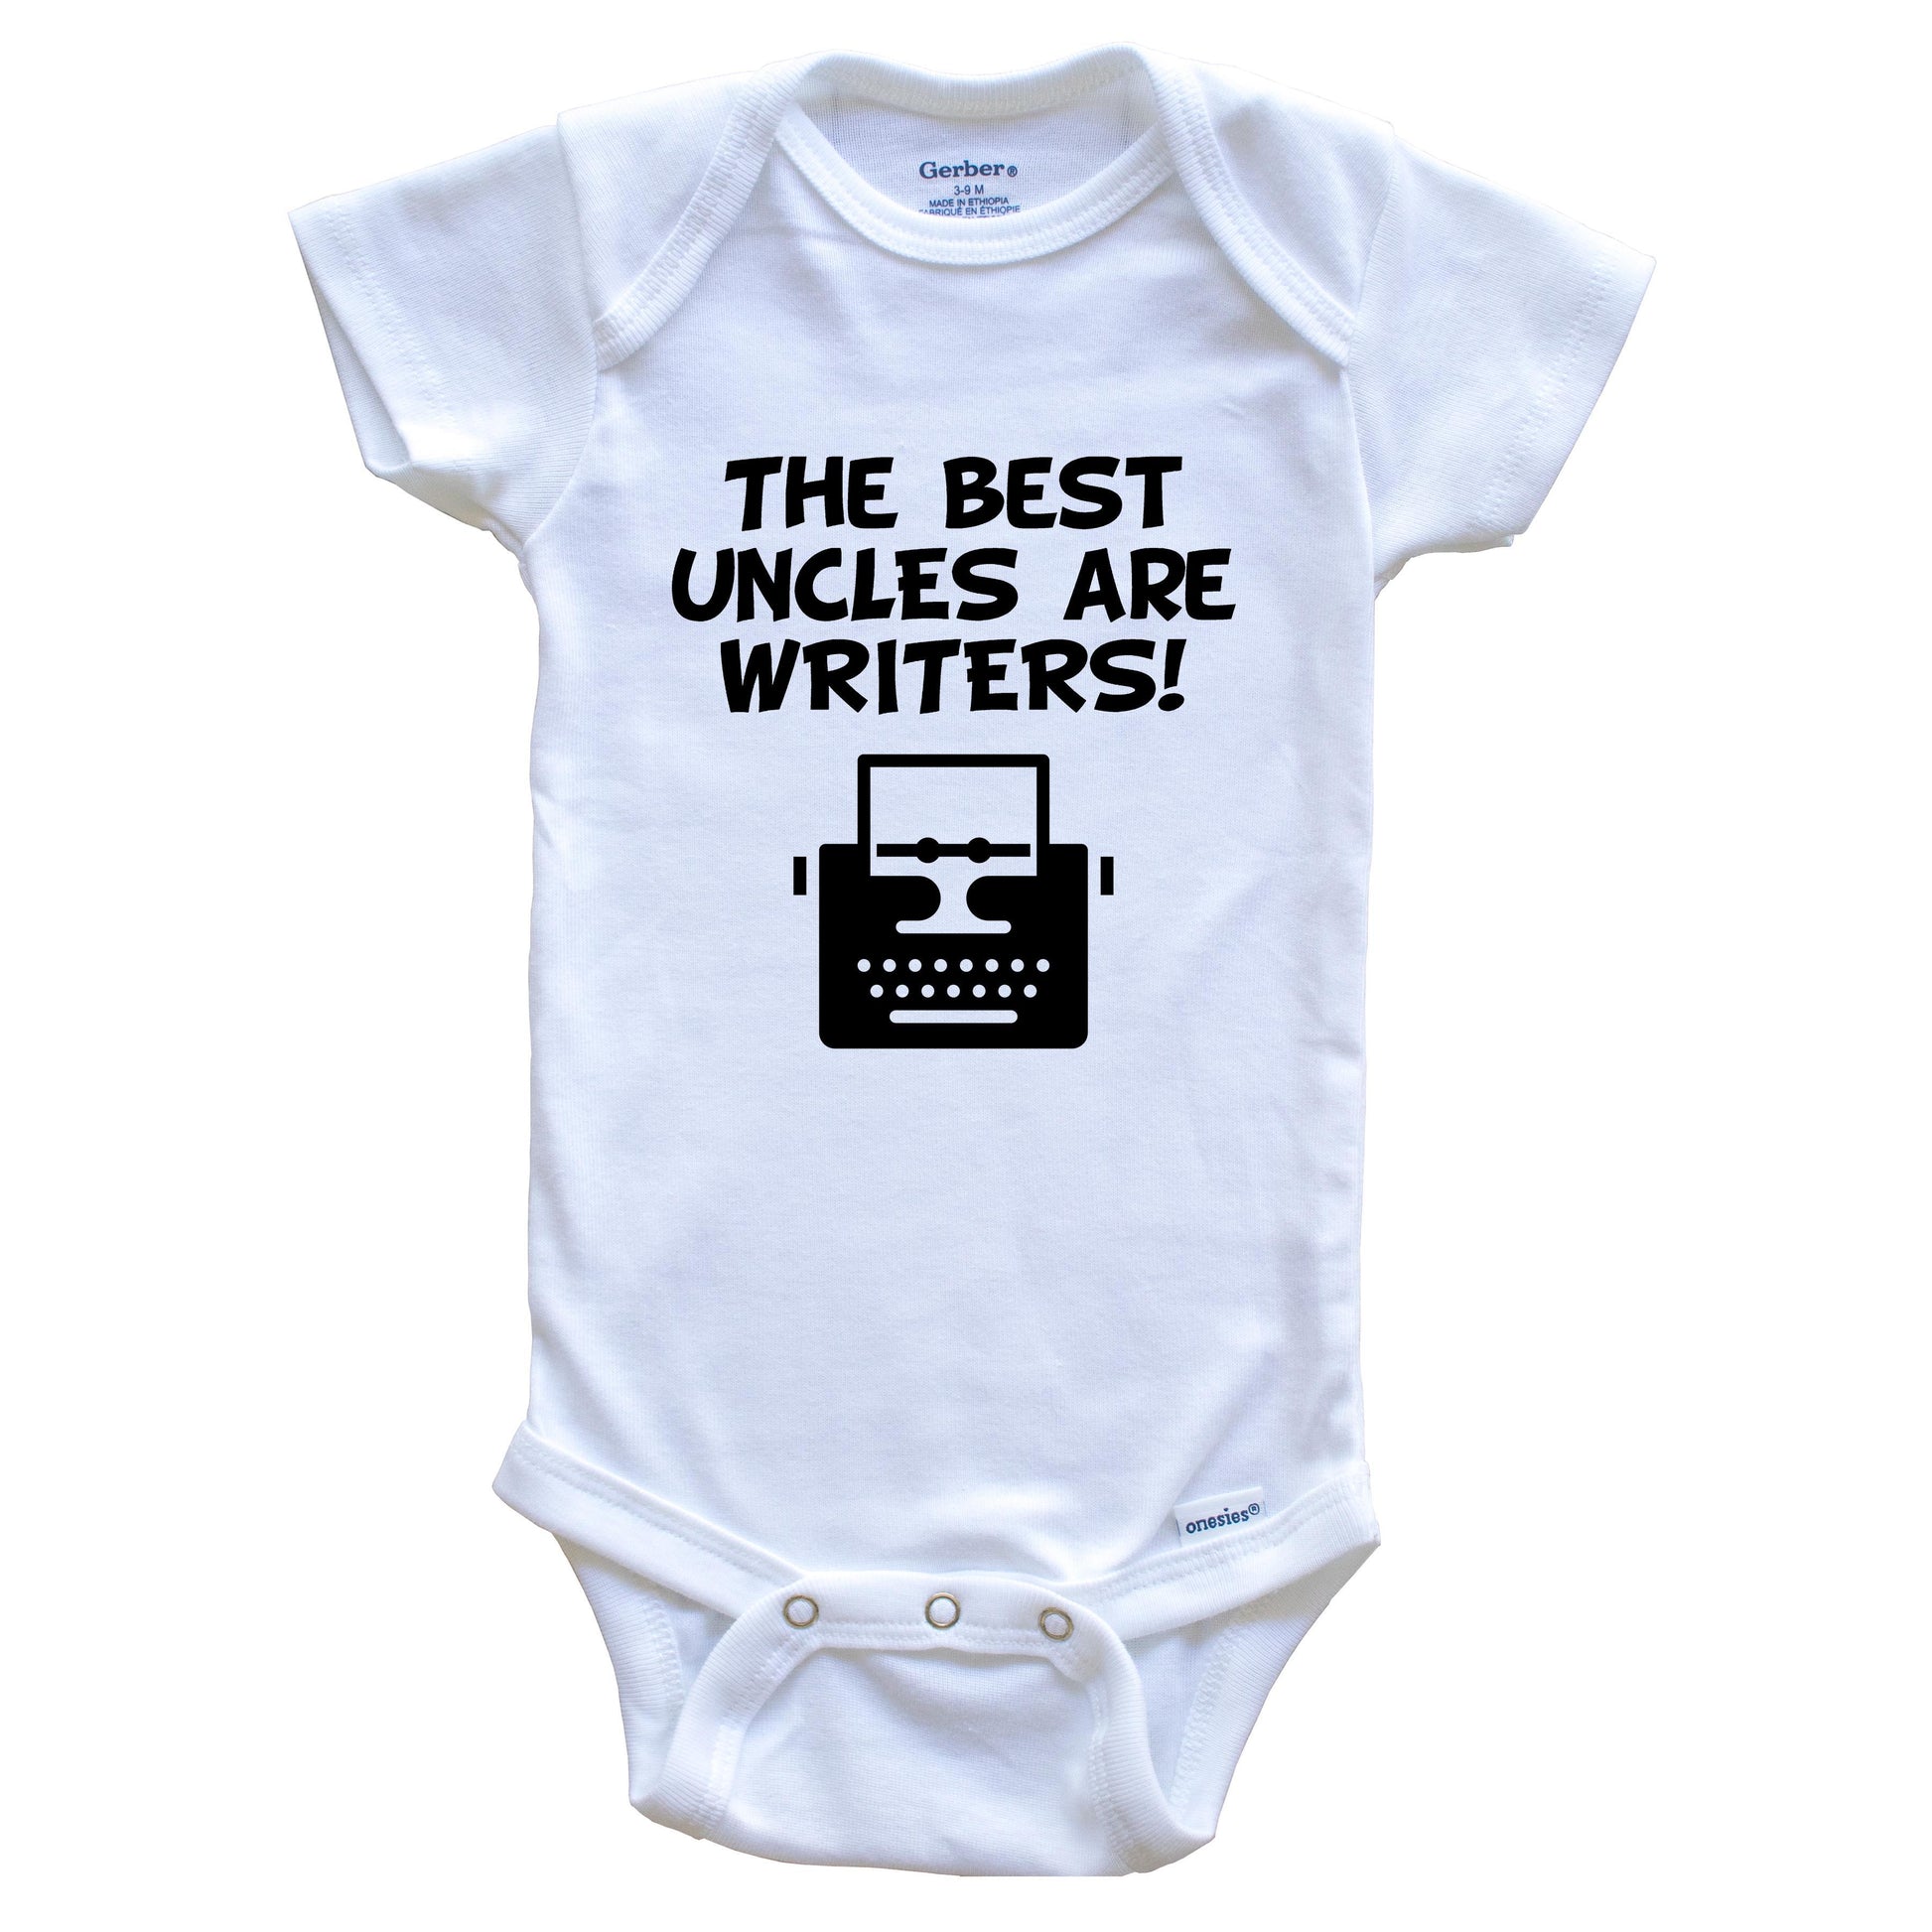 The Best Uncles Are Writers Funny Niece Nephew Baby Onesie